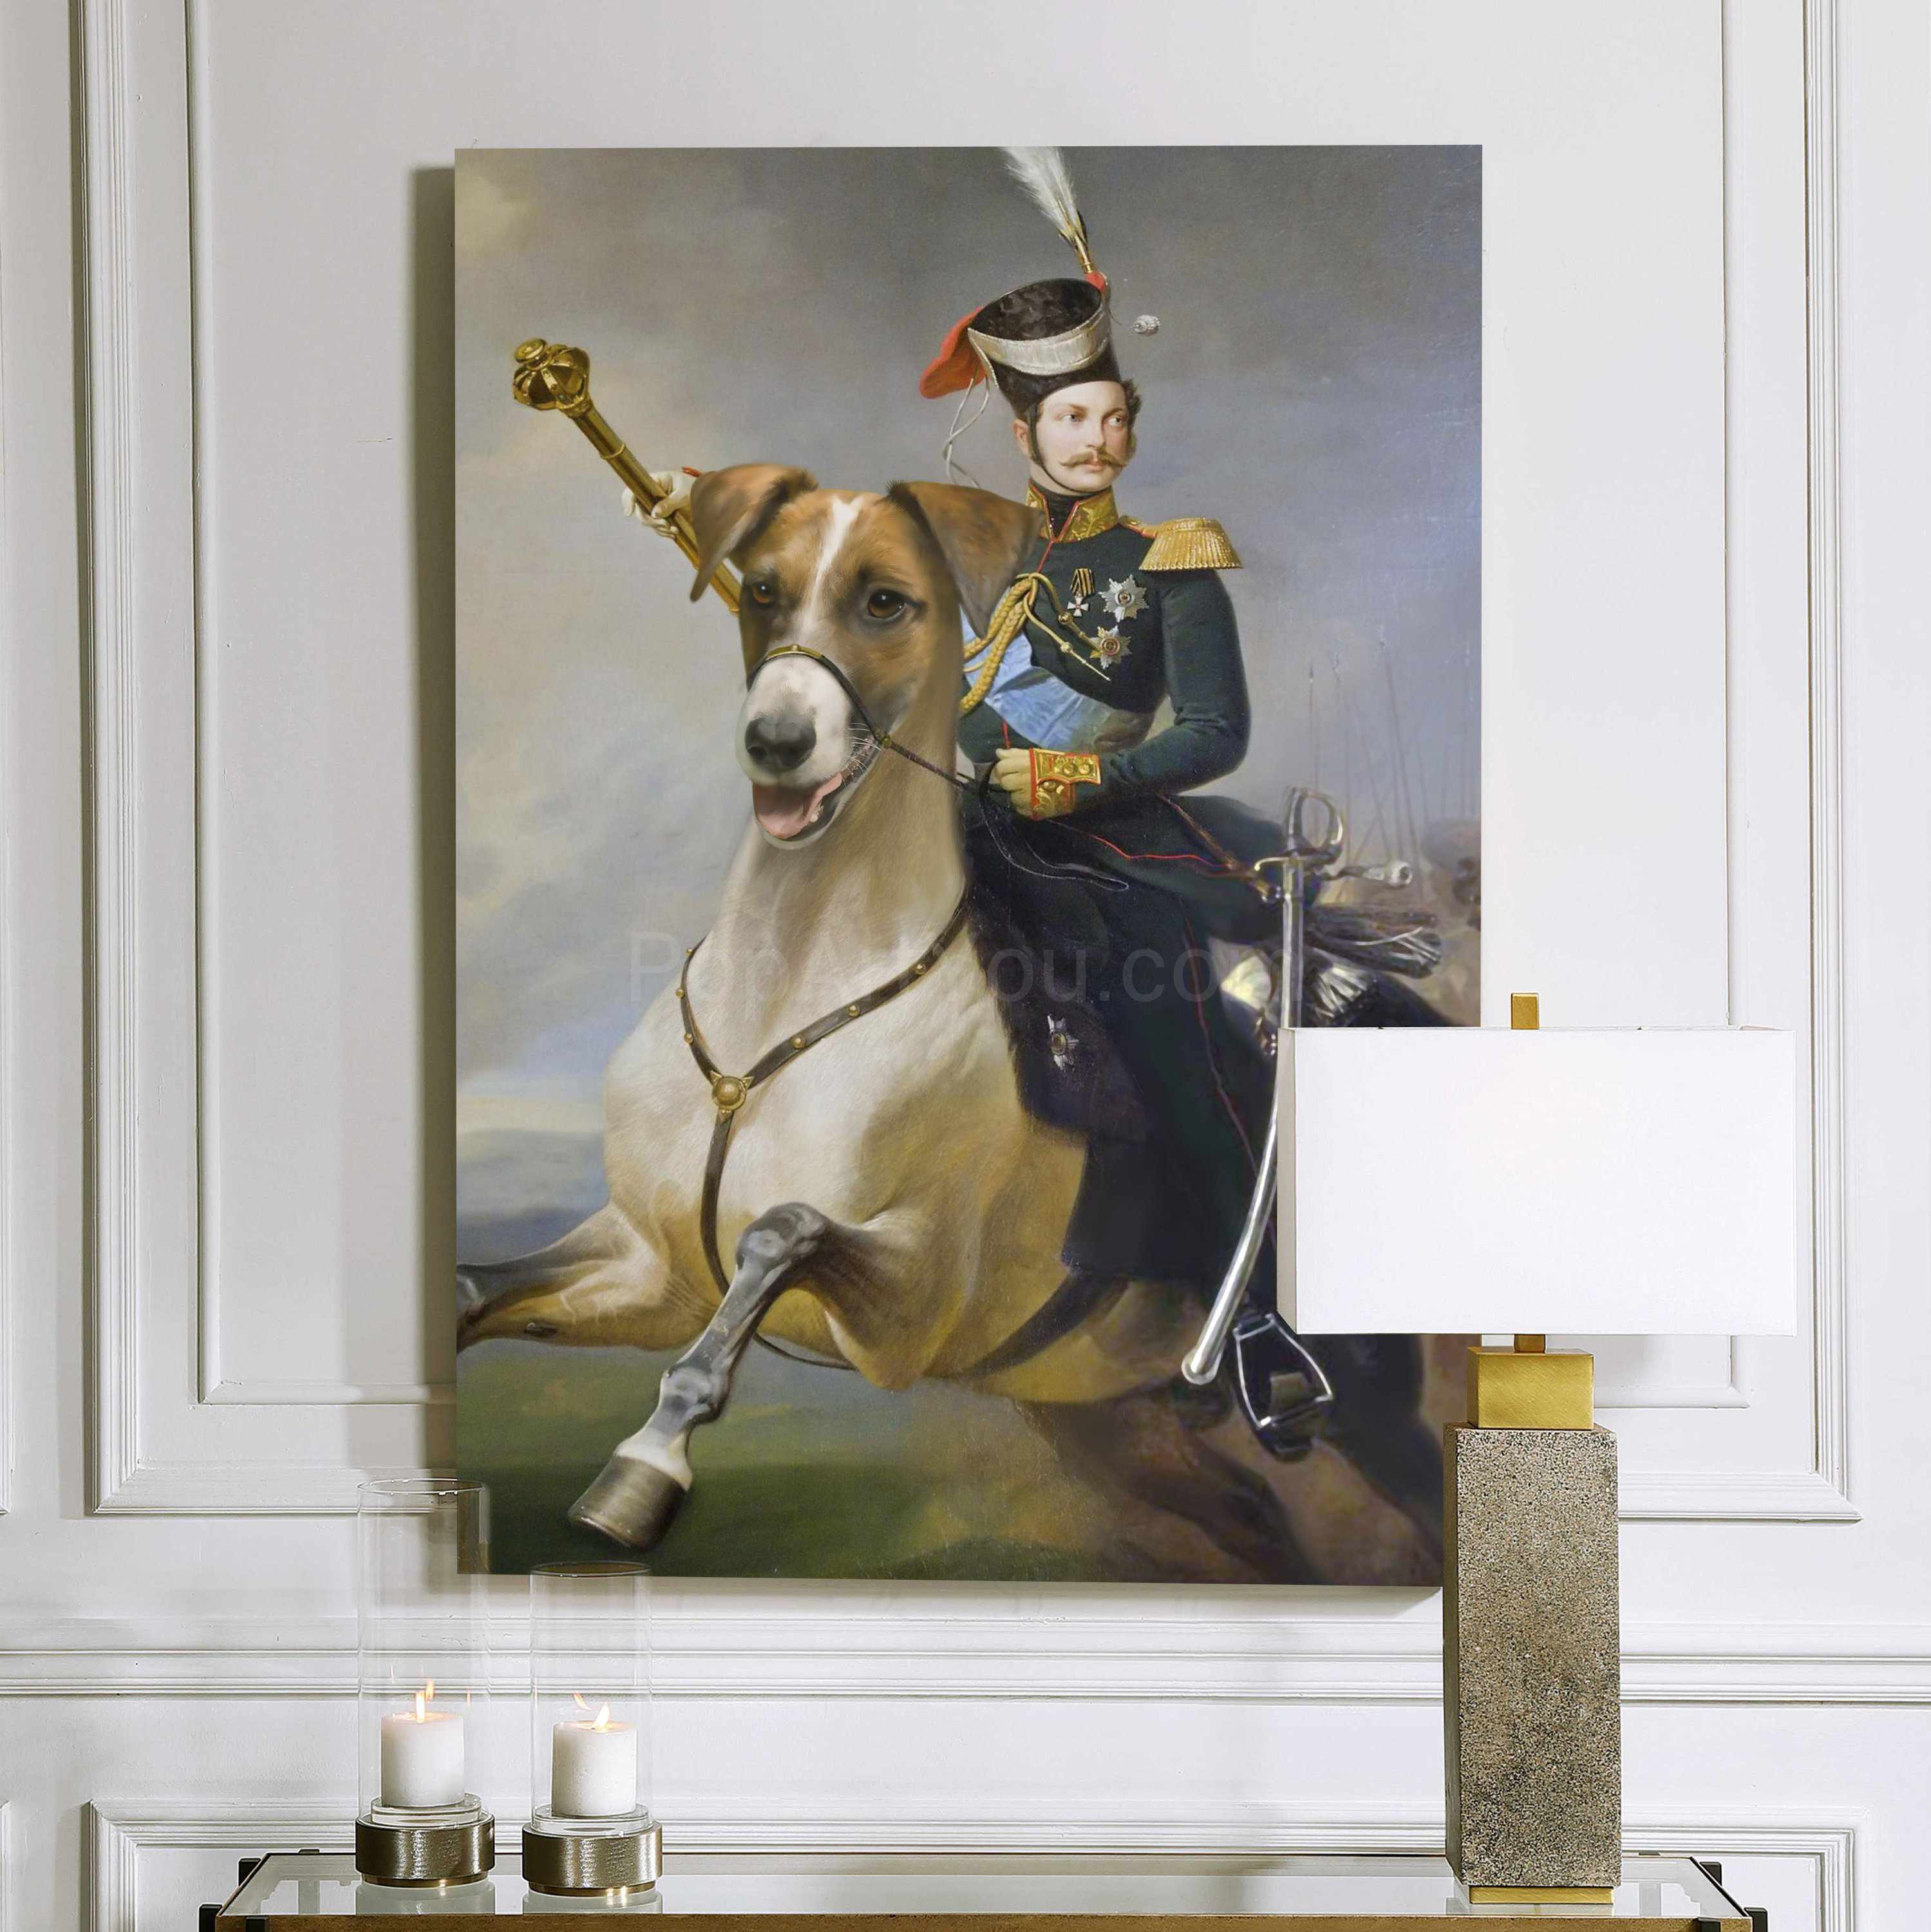 A portrait of a man dressed in historical royal clothes running on a huge dog hangs on a white wall